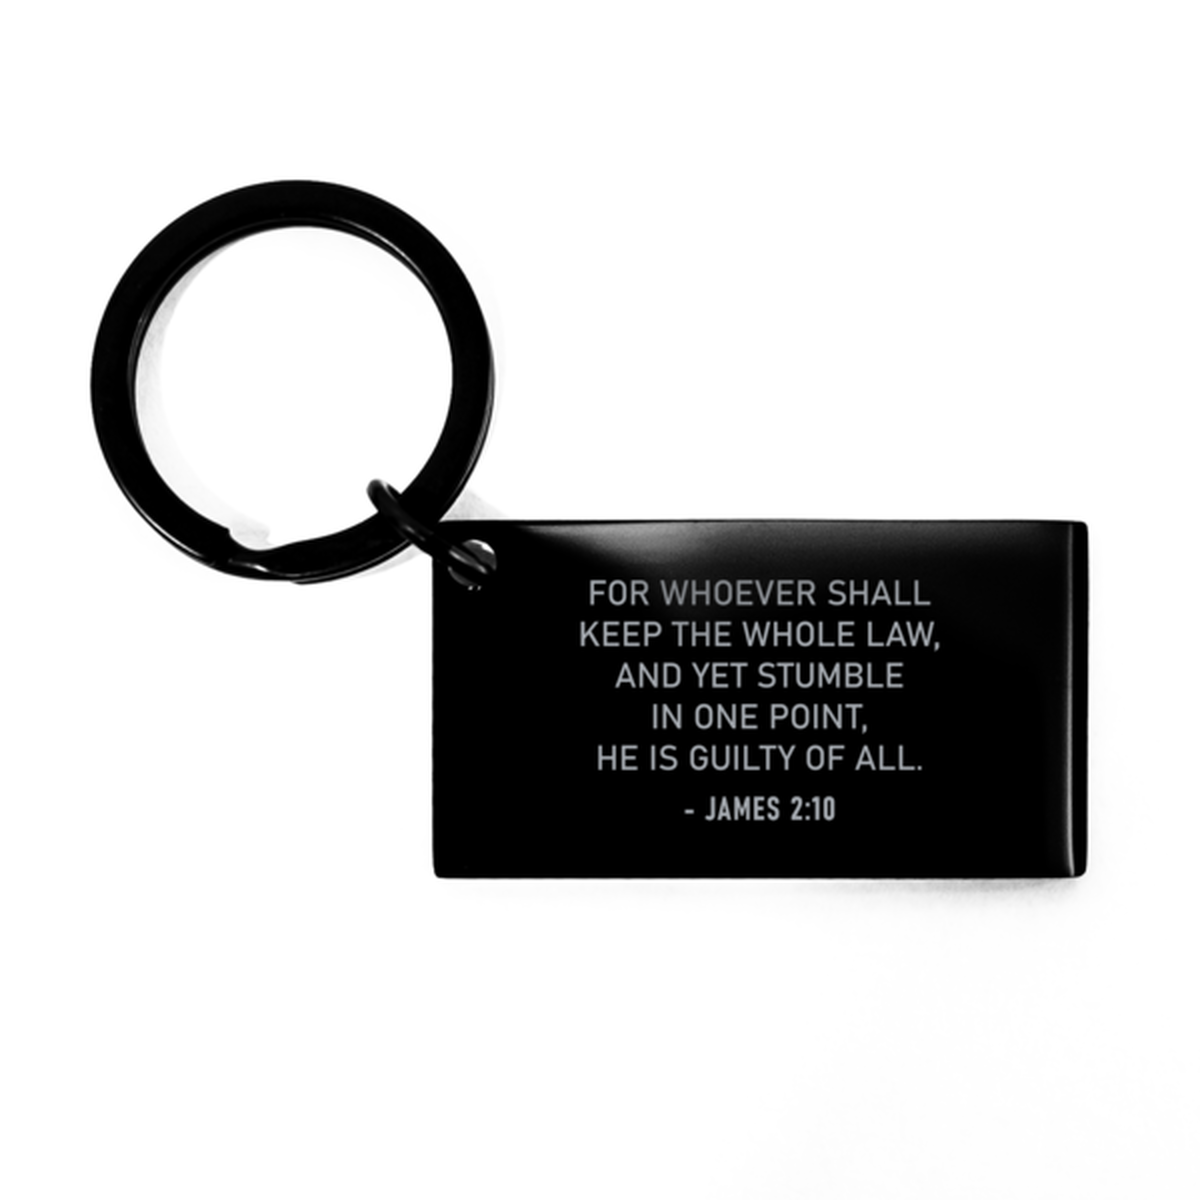 Bible Verse Black Keychain, James 2:10 For Whoever Shall Keep The Whole Law, And Yet, Christian Inspirational Key Ring Gifts For Men Women